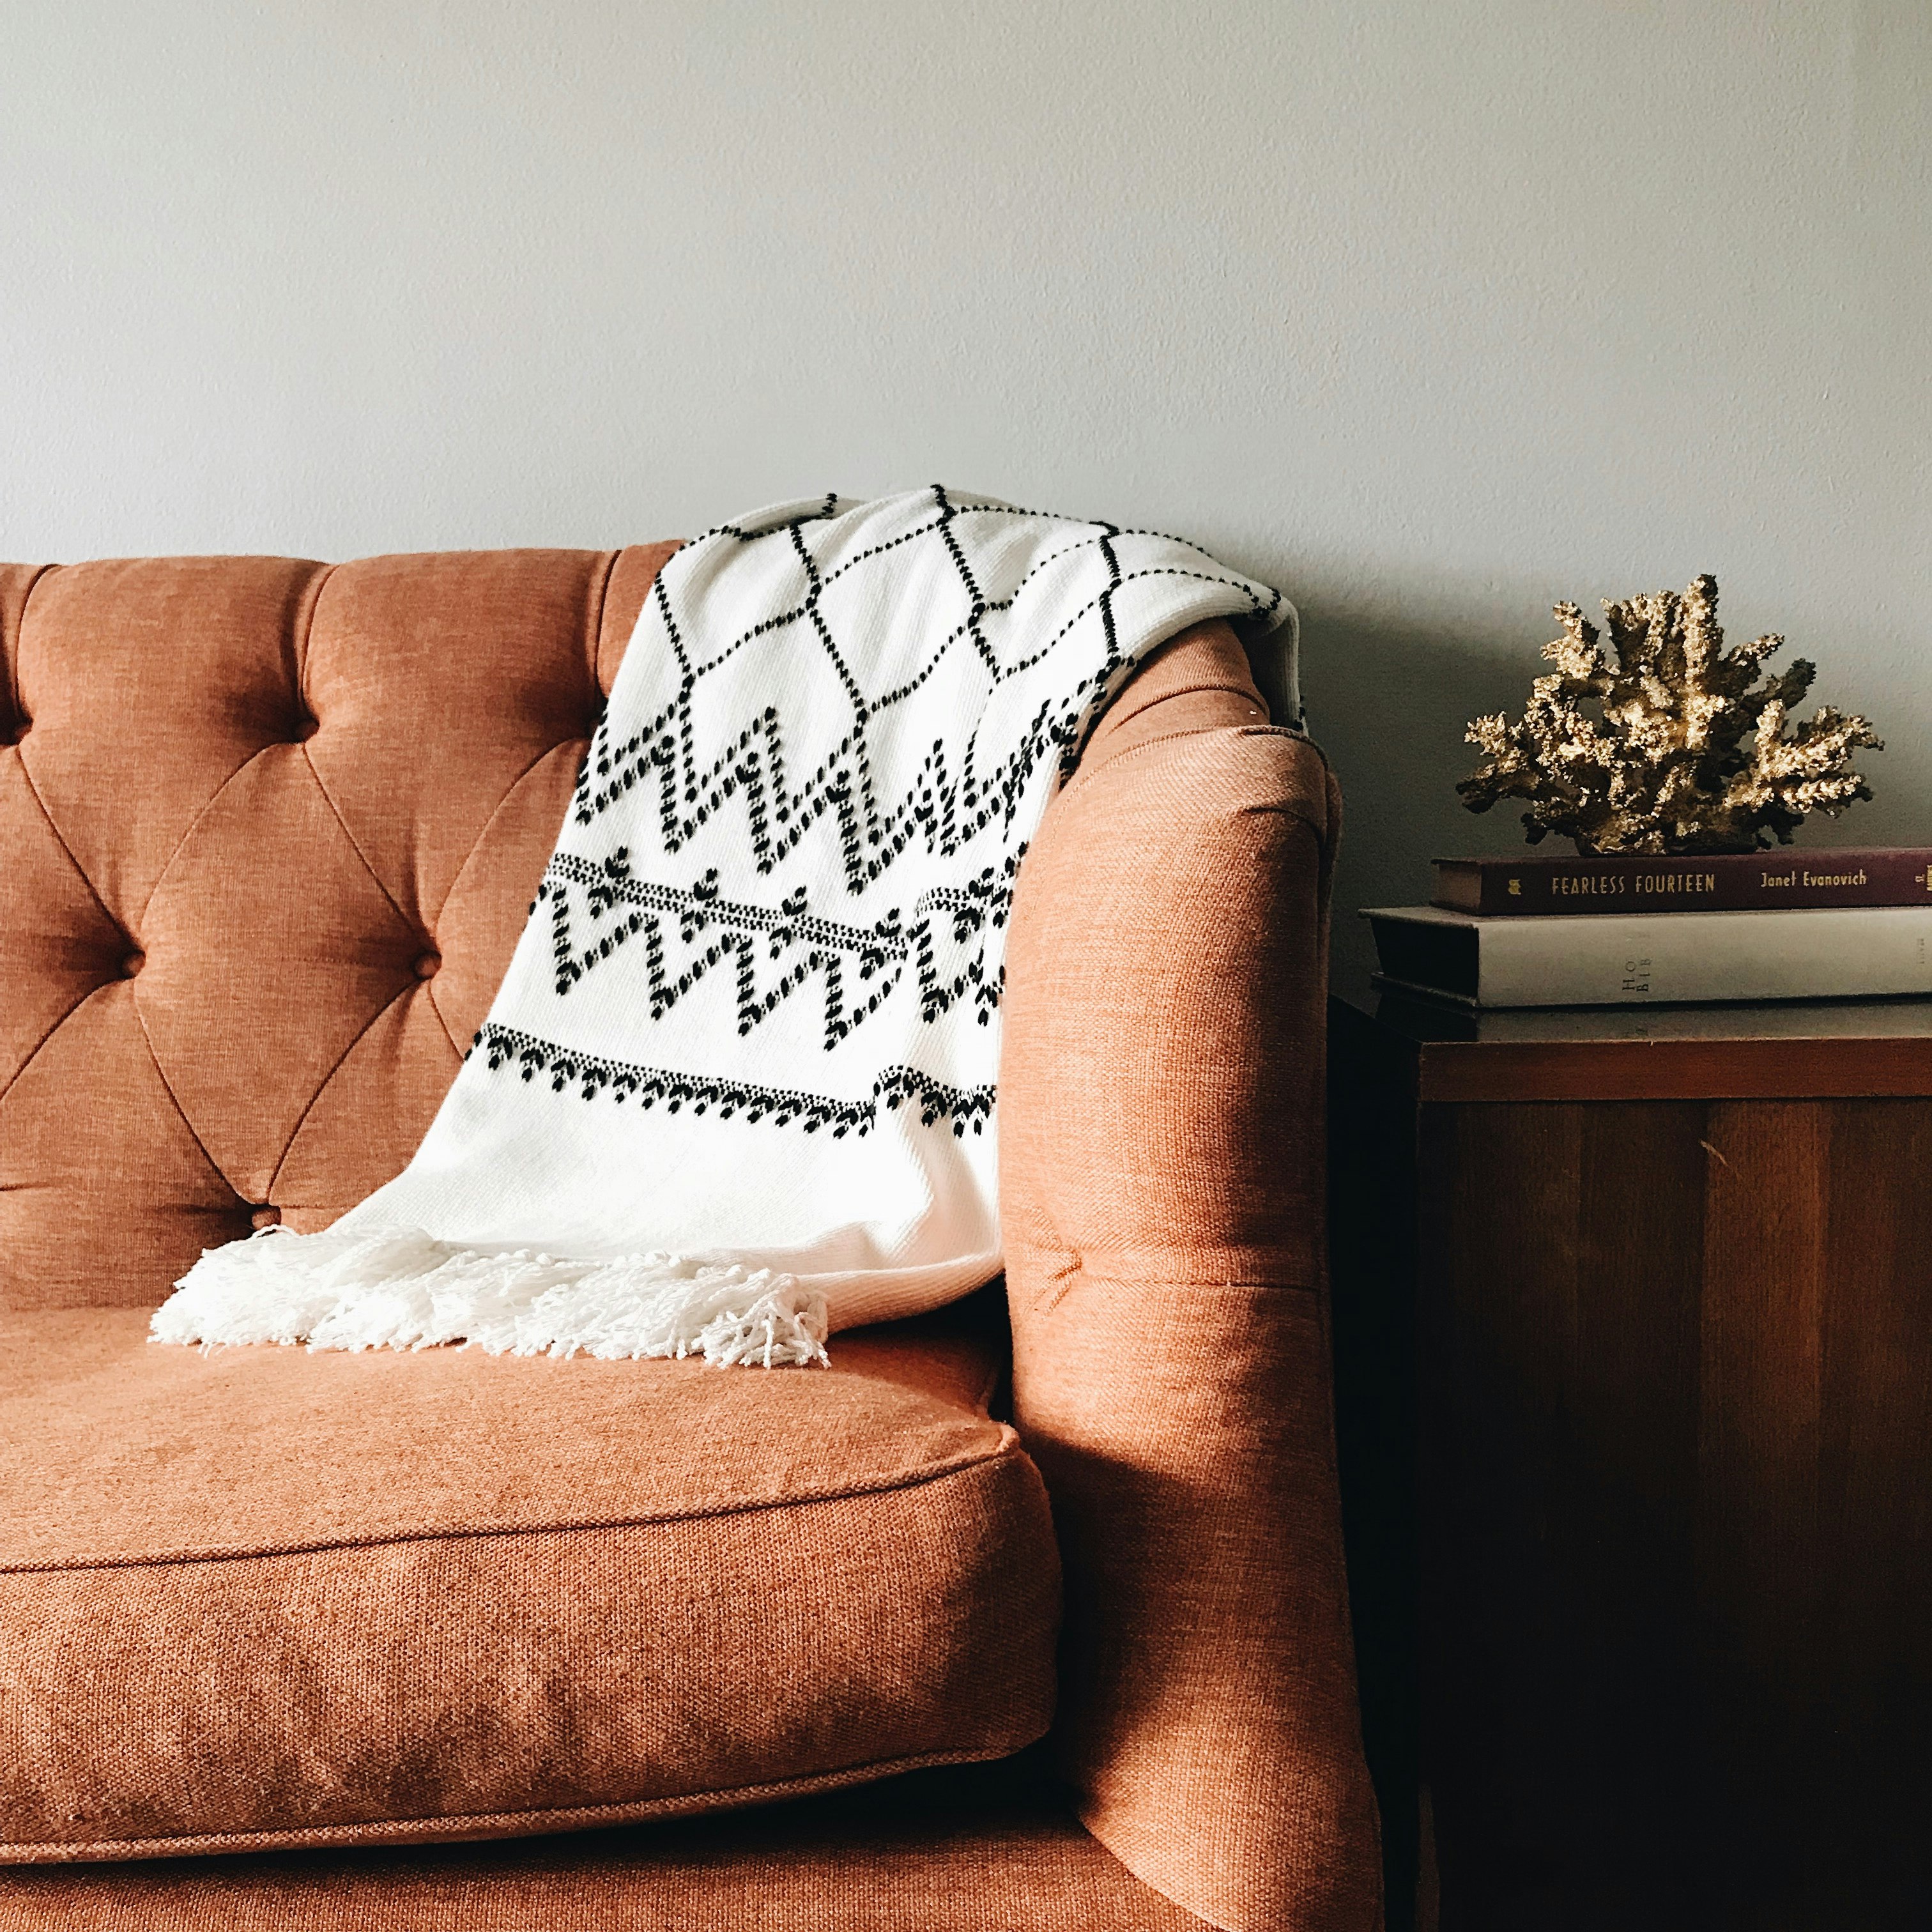 white and black textile on brown couch